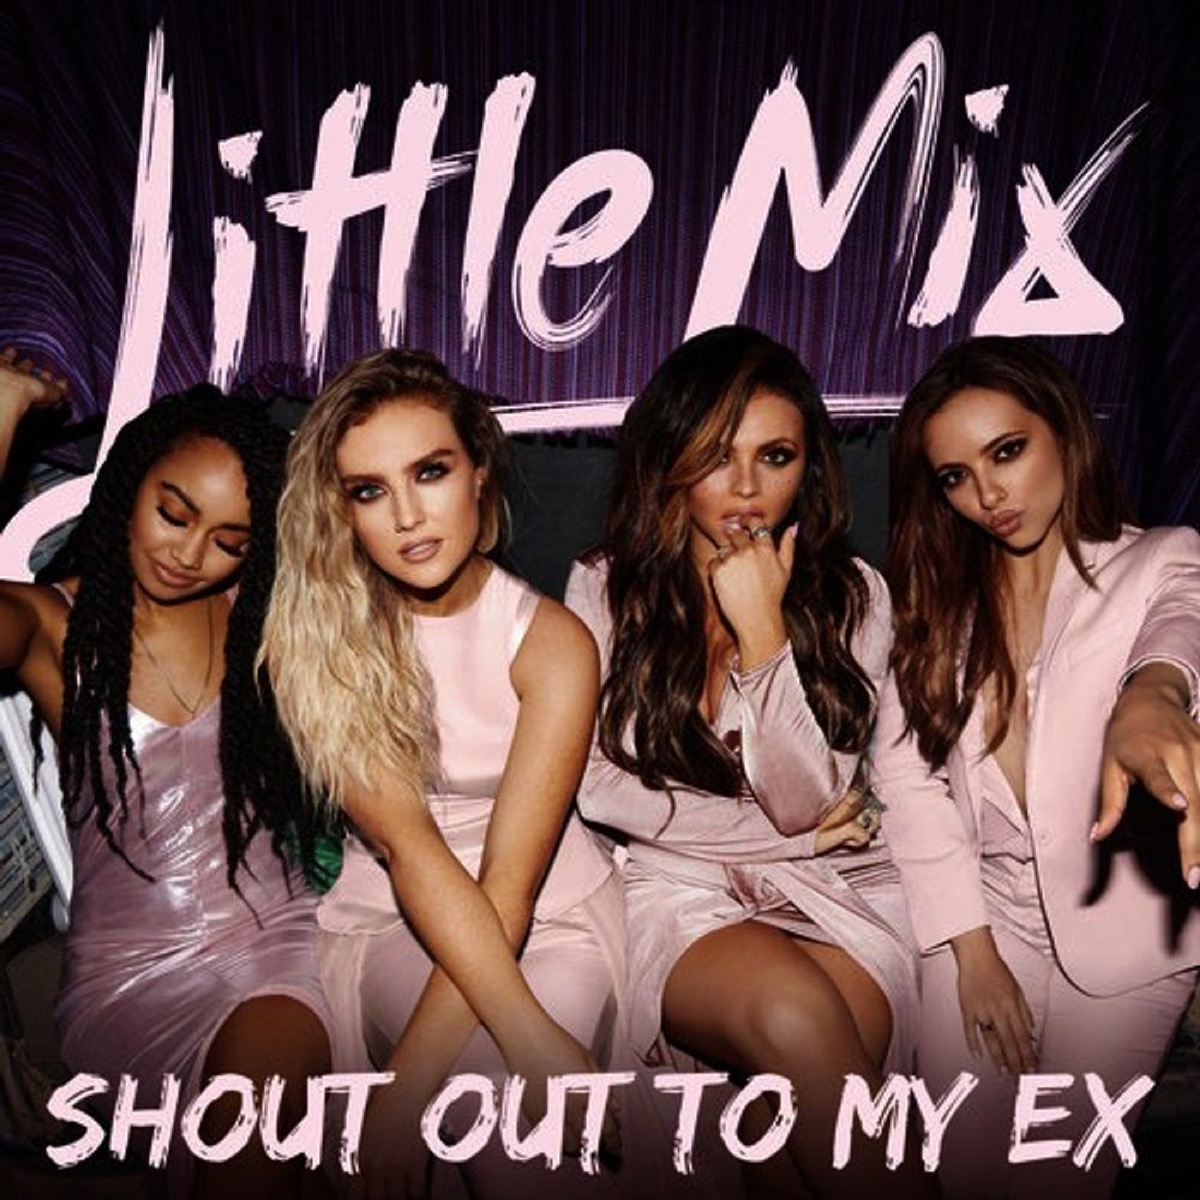 47. "Shout Out to My Ex" by Little Mix (2017). 